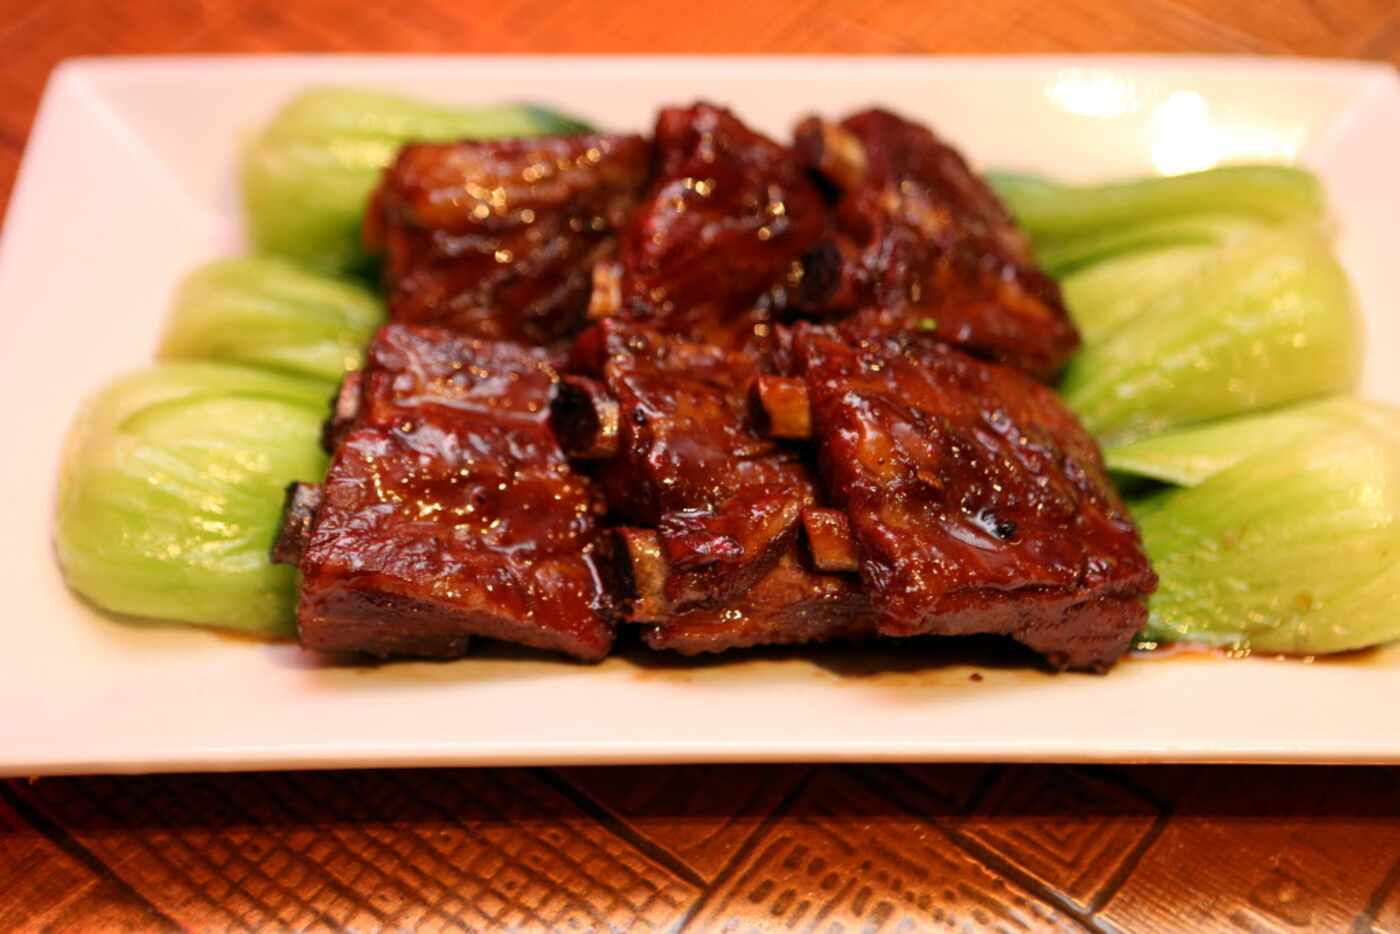 Royal China's pork rib Wuxi-style is redolent of star anise and cinnamon.